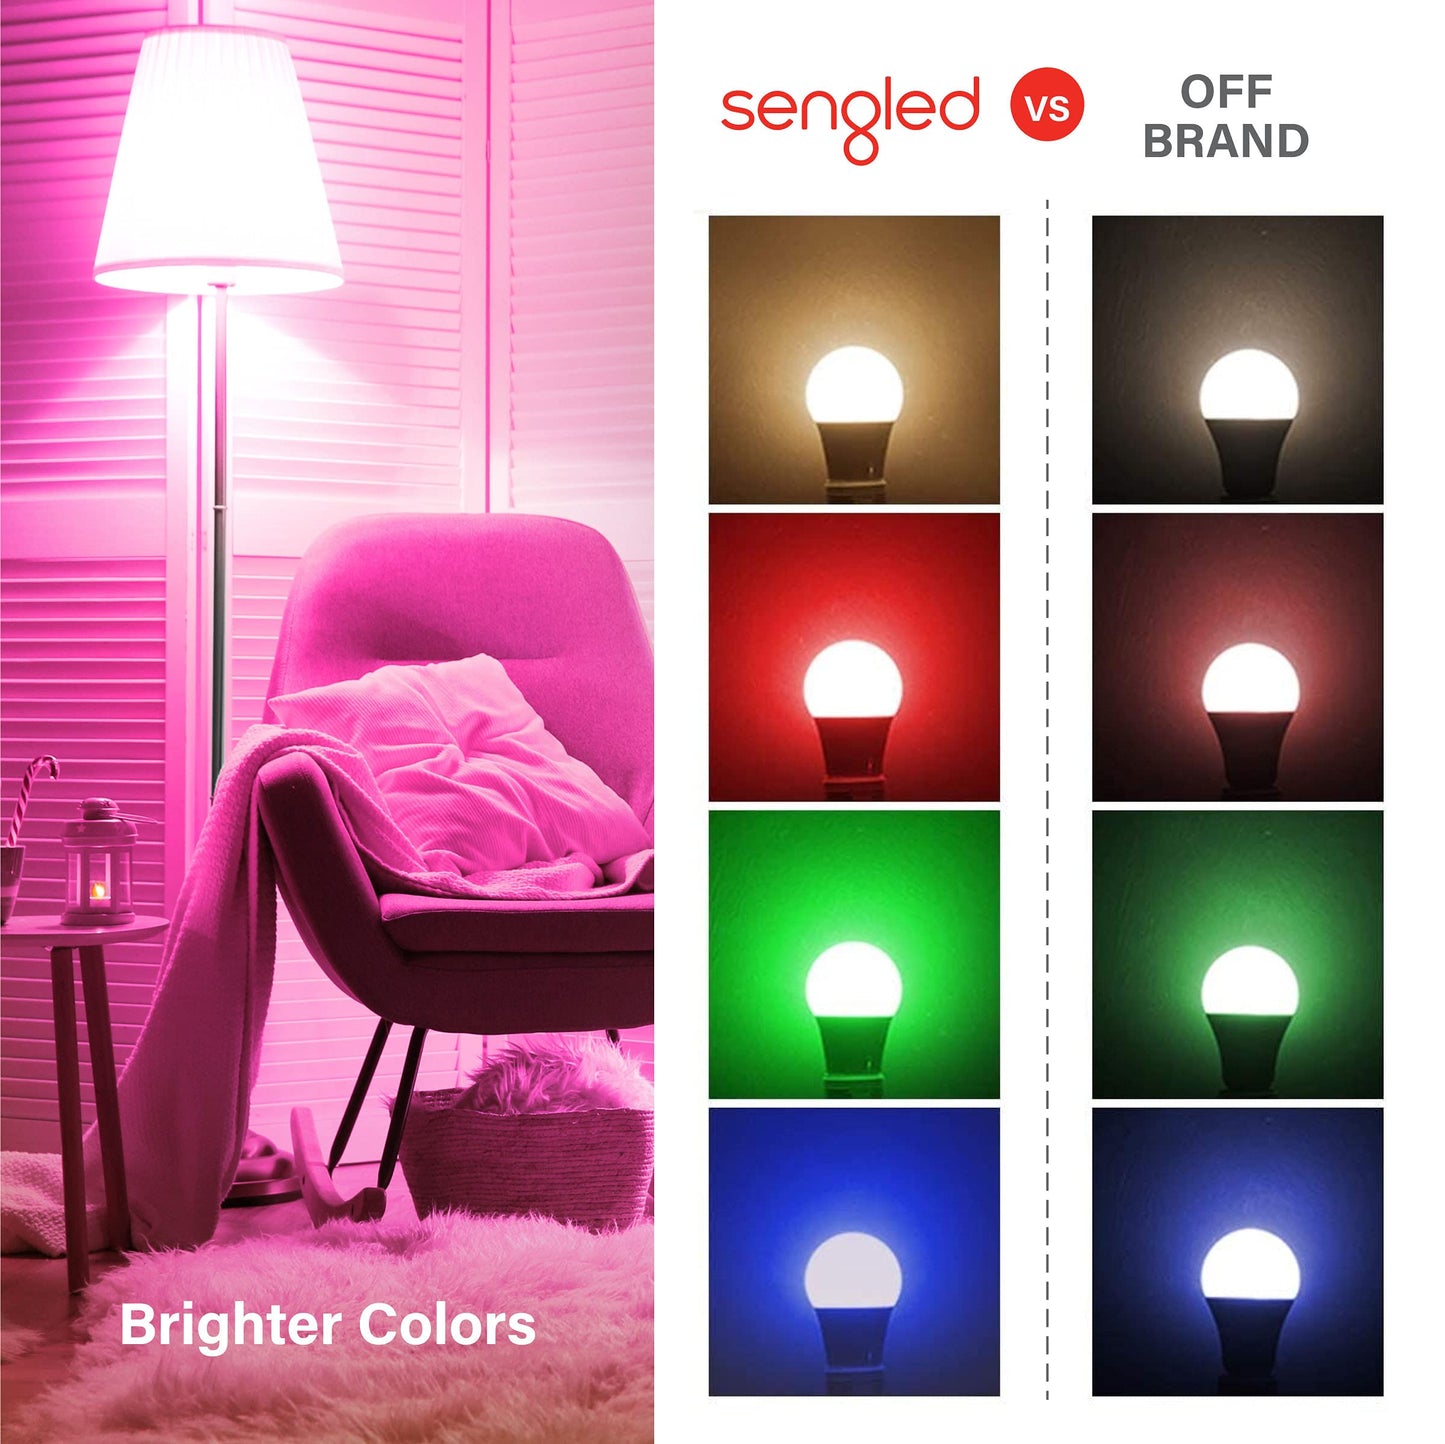 Sengled Smart Light Bulbs, Bluetooth Mesh Color Changing Light Bulb, Smart Bulbs That Work with Alexa Only, Dimmable LED Alexa Light Bulb A19 E26 Multicolor, 60W Equivalent 800LM, 2Pack